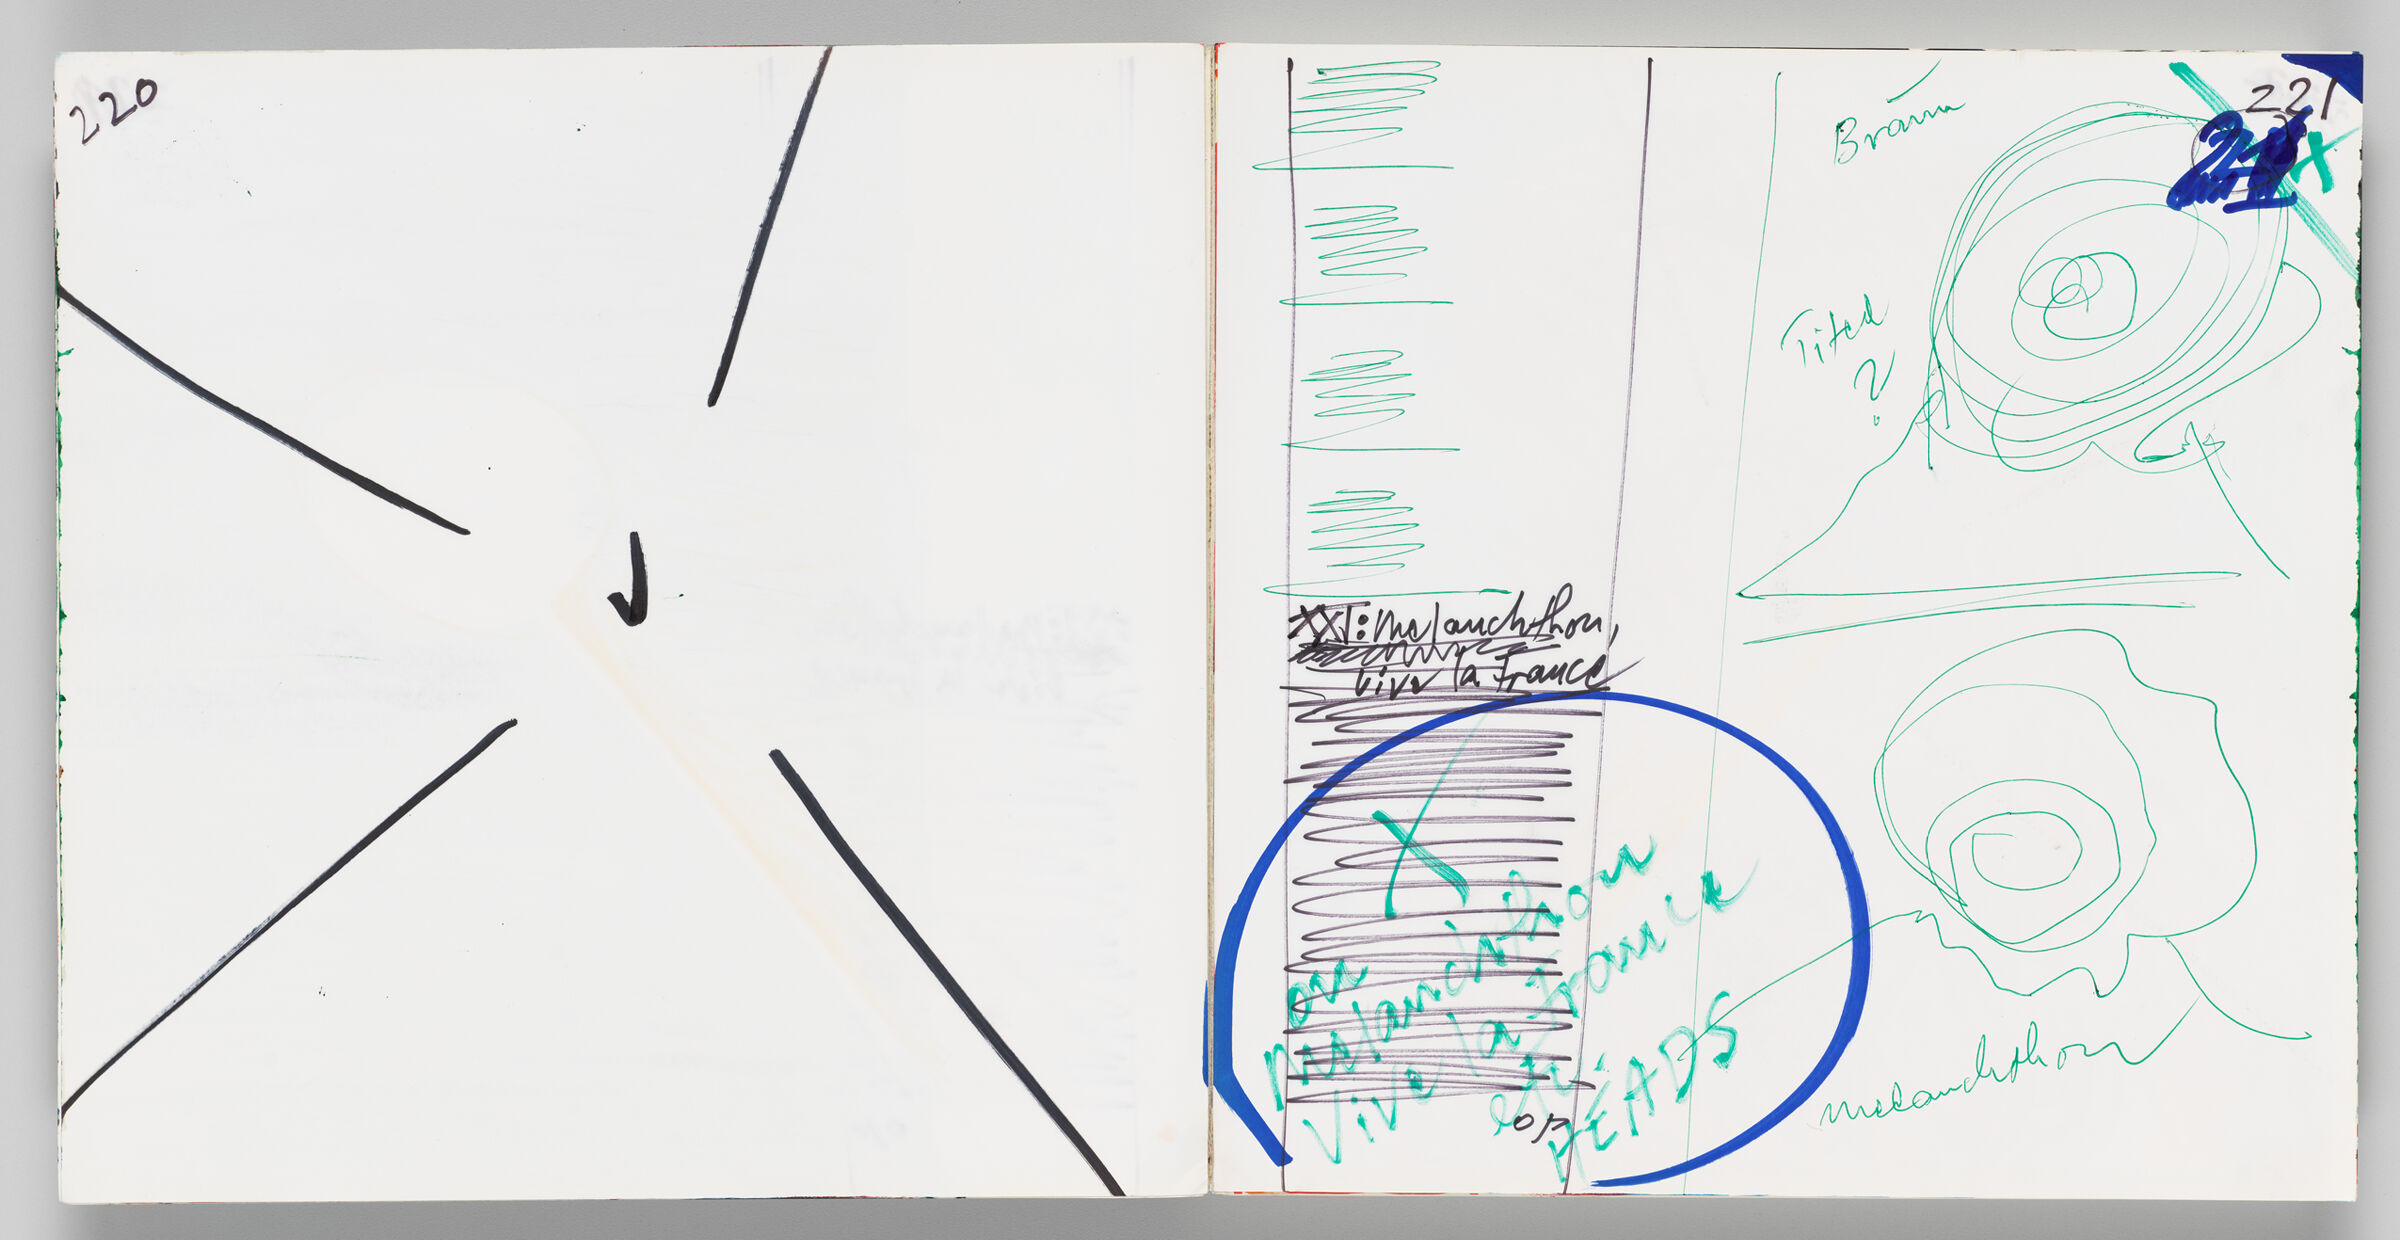 Untitled (Lines And Checkmark, Left Page); Untitled (Page Layout Design, Right Page)